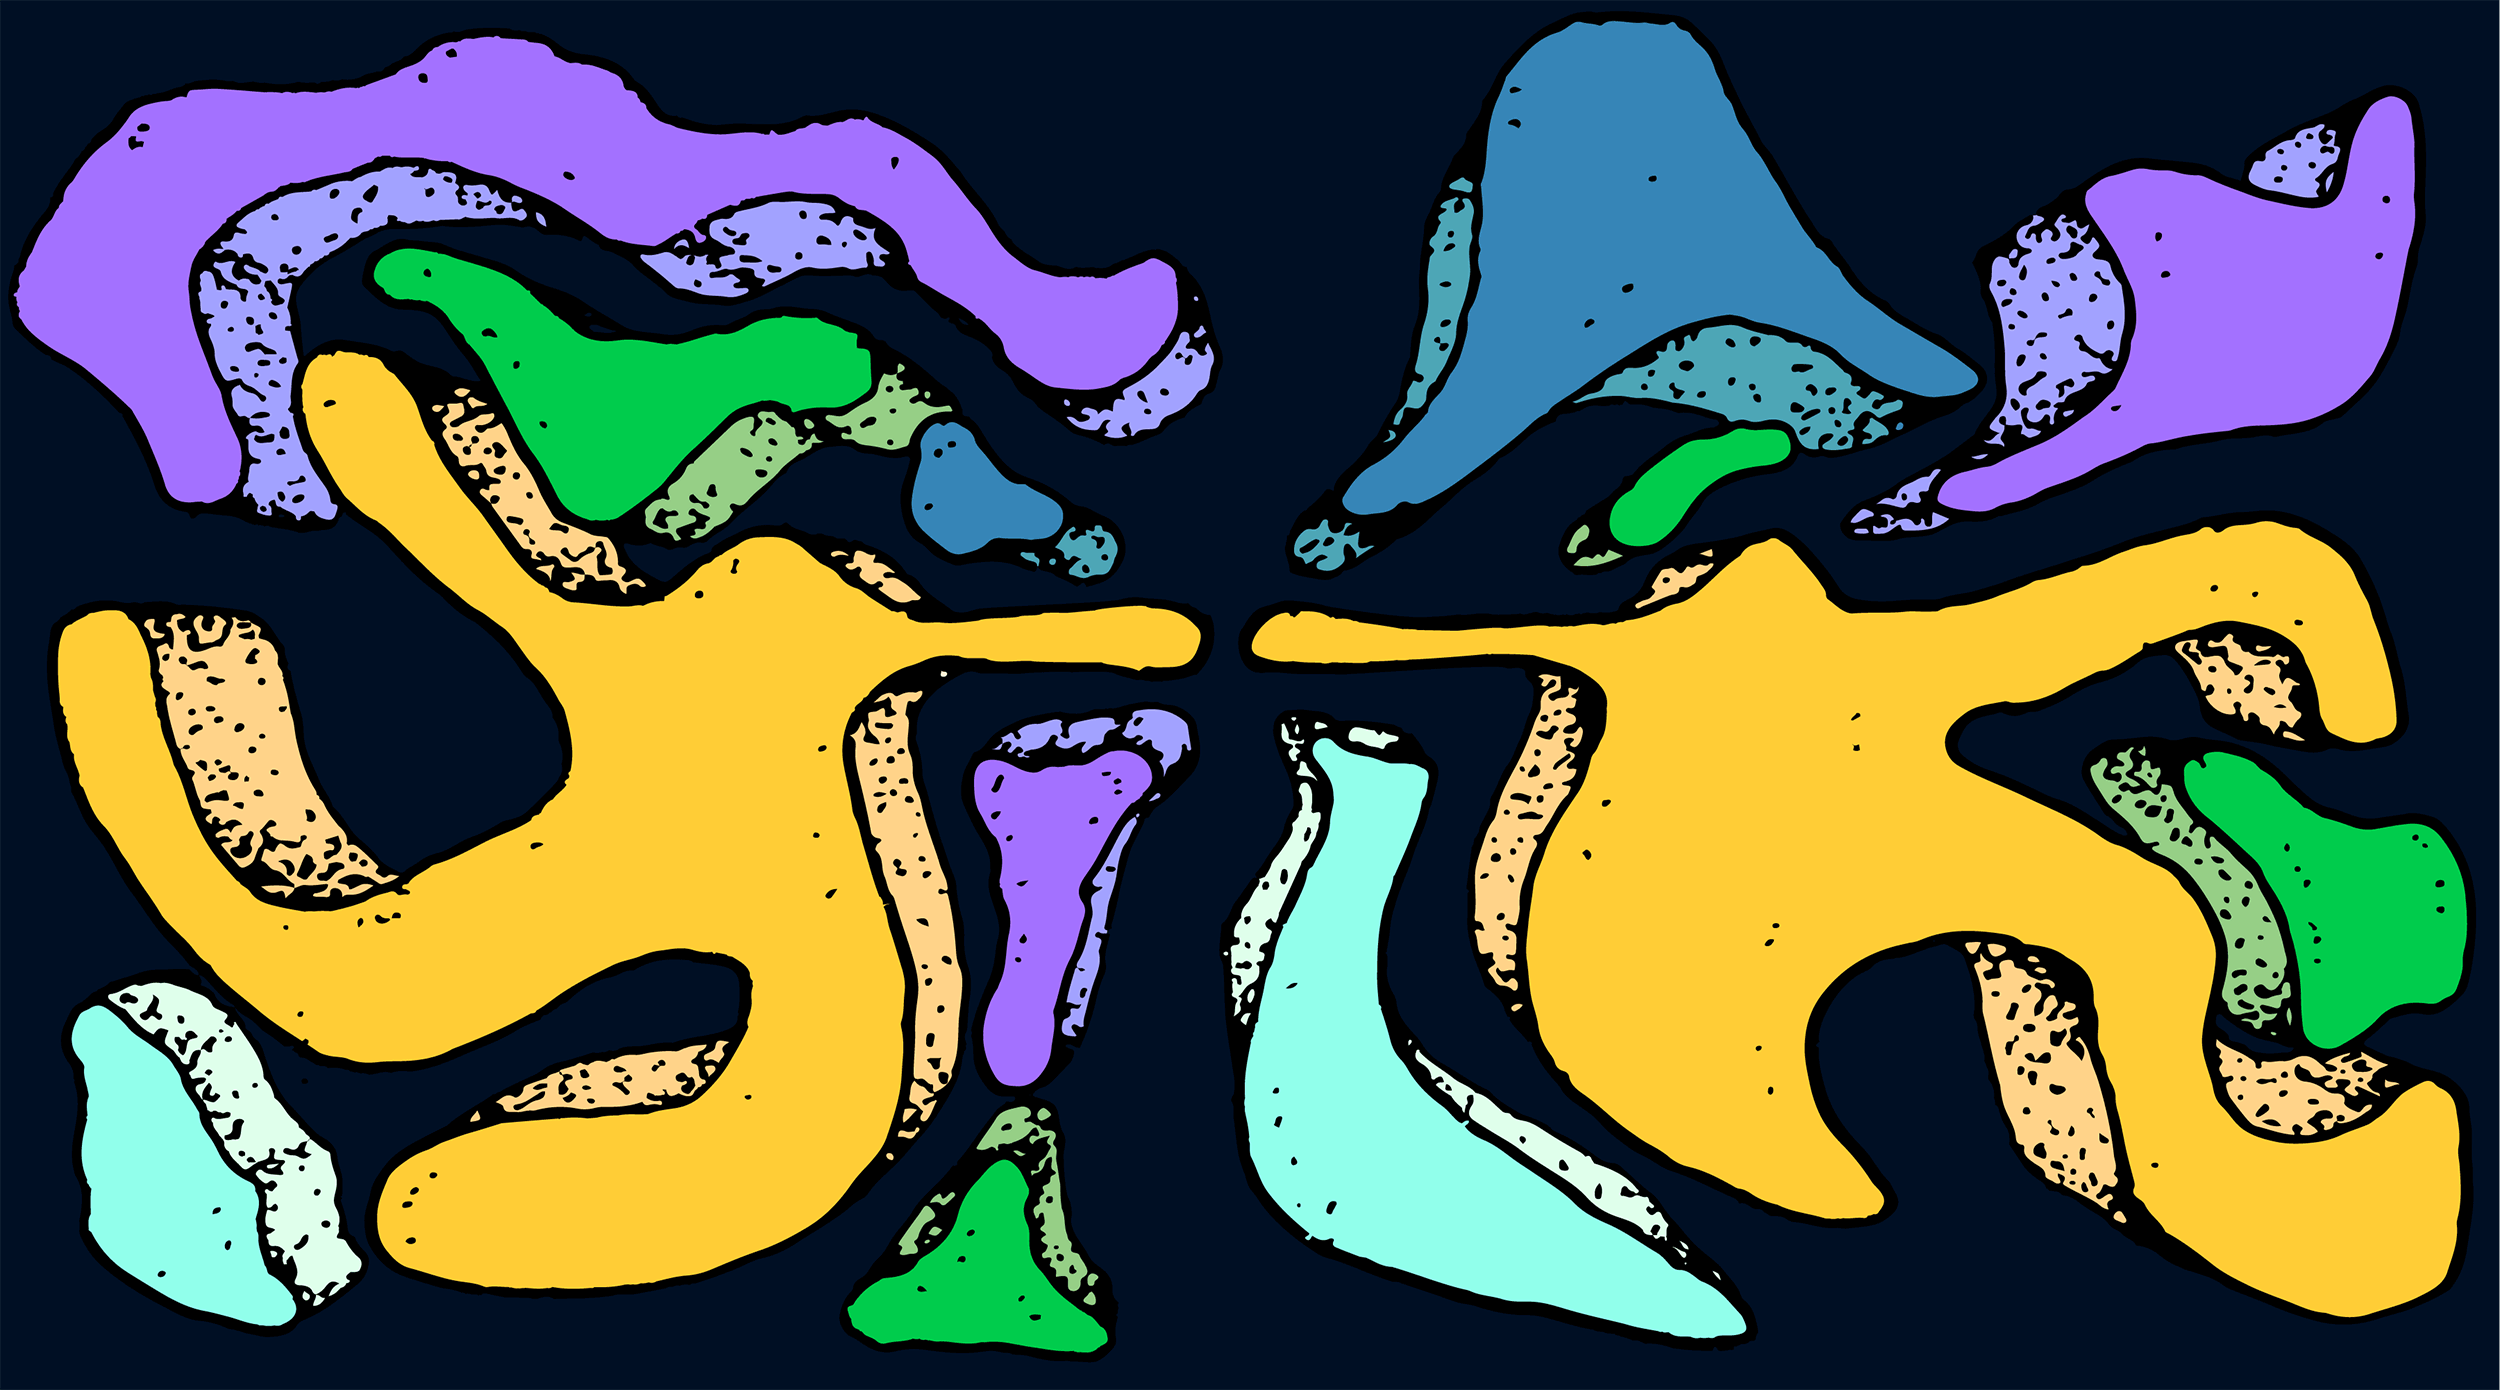 An abstract composition featuring various green, yellow, blue, and purple shapes, with two sets of shapes resembling human forms merging together in the center of the composition.